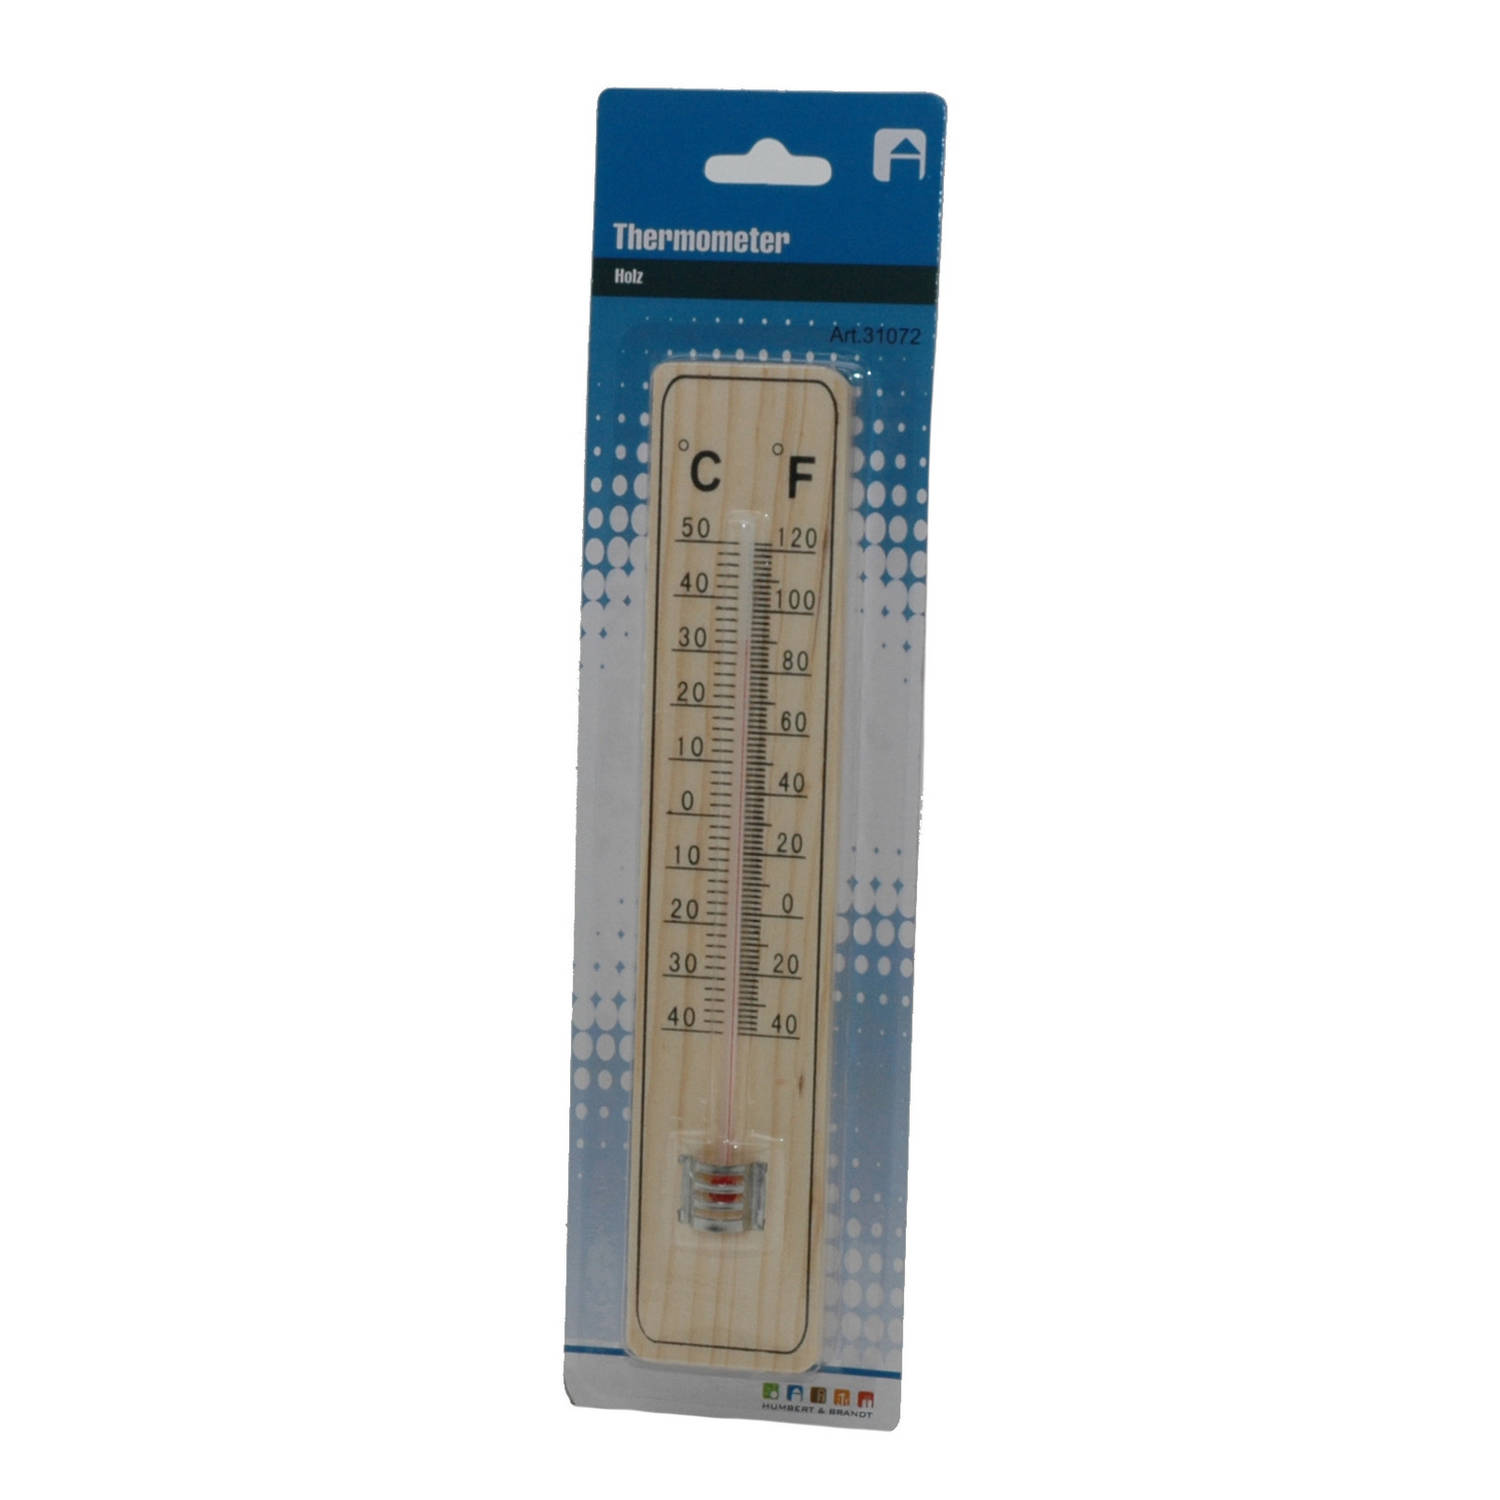 Binnen/buiten thermometer hout 21 x 4 cm - Buitenthermometers